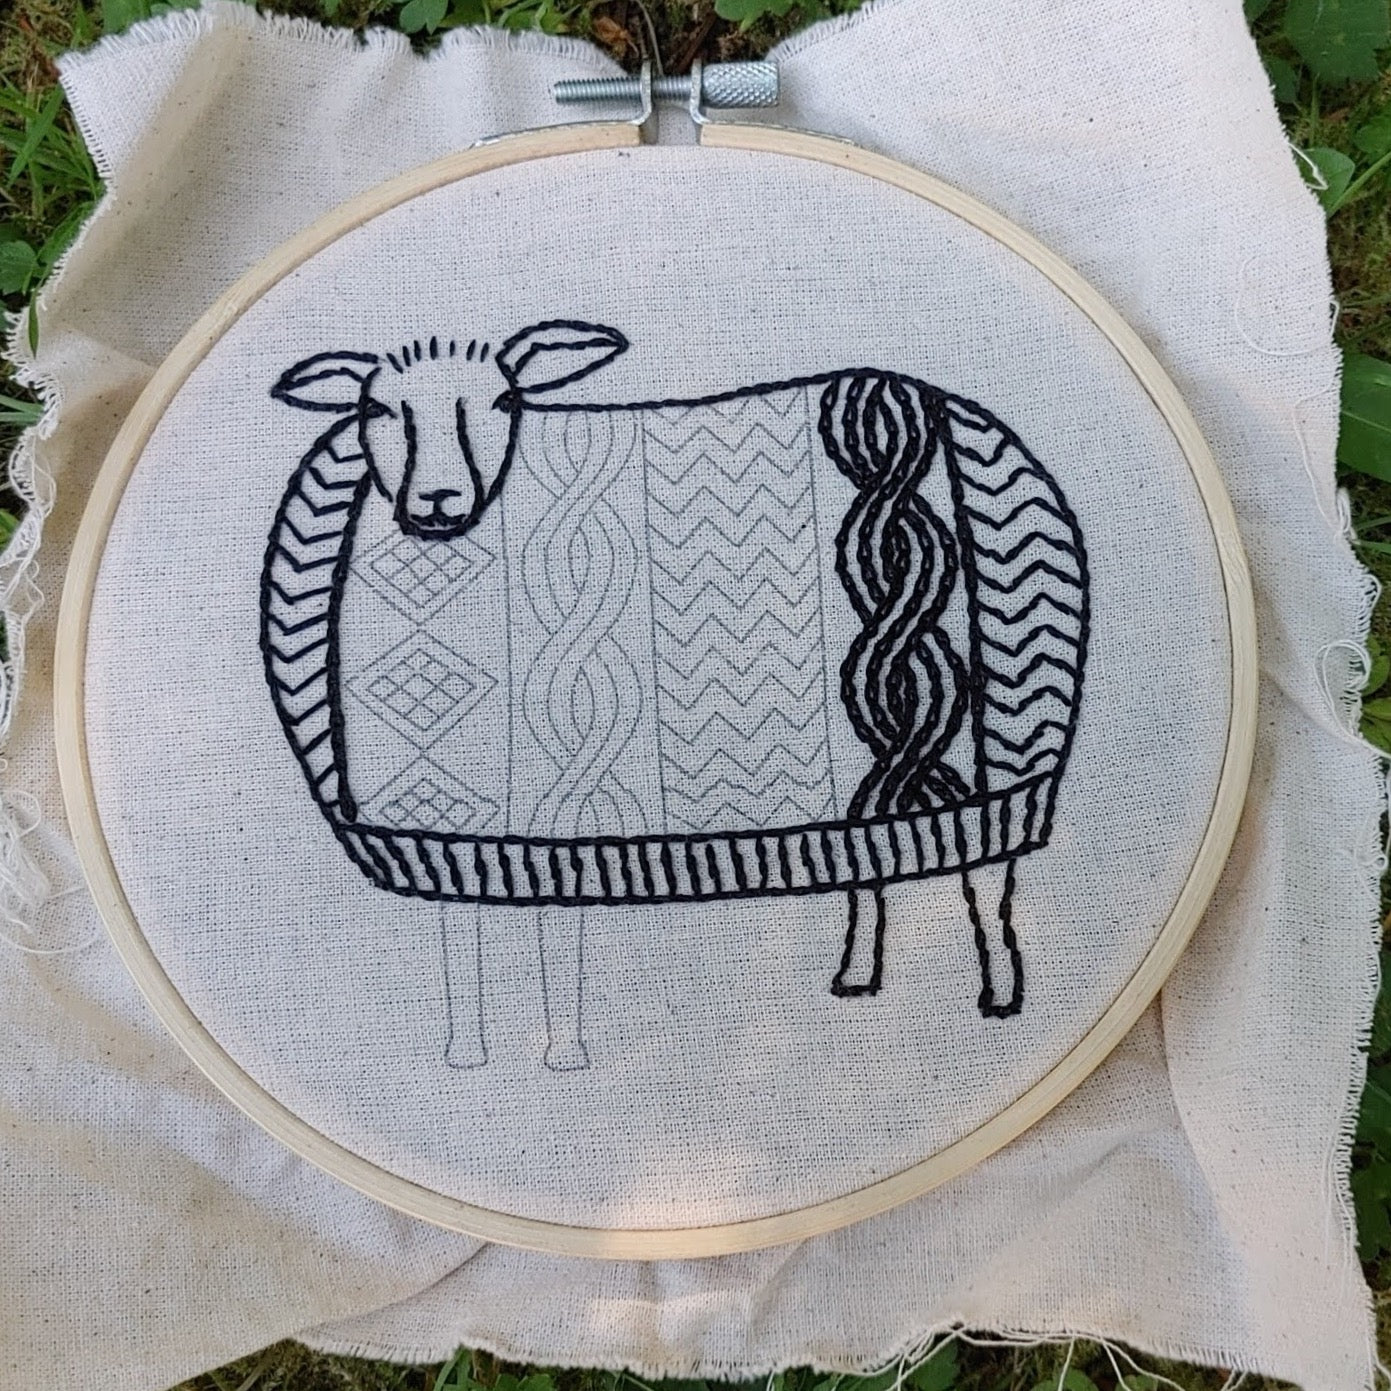 Sweater weather embroidery kit in progress